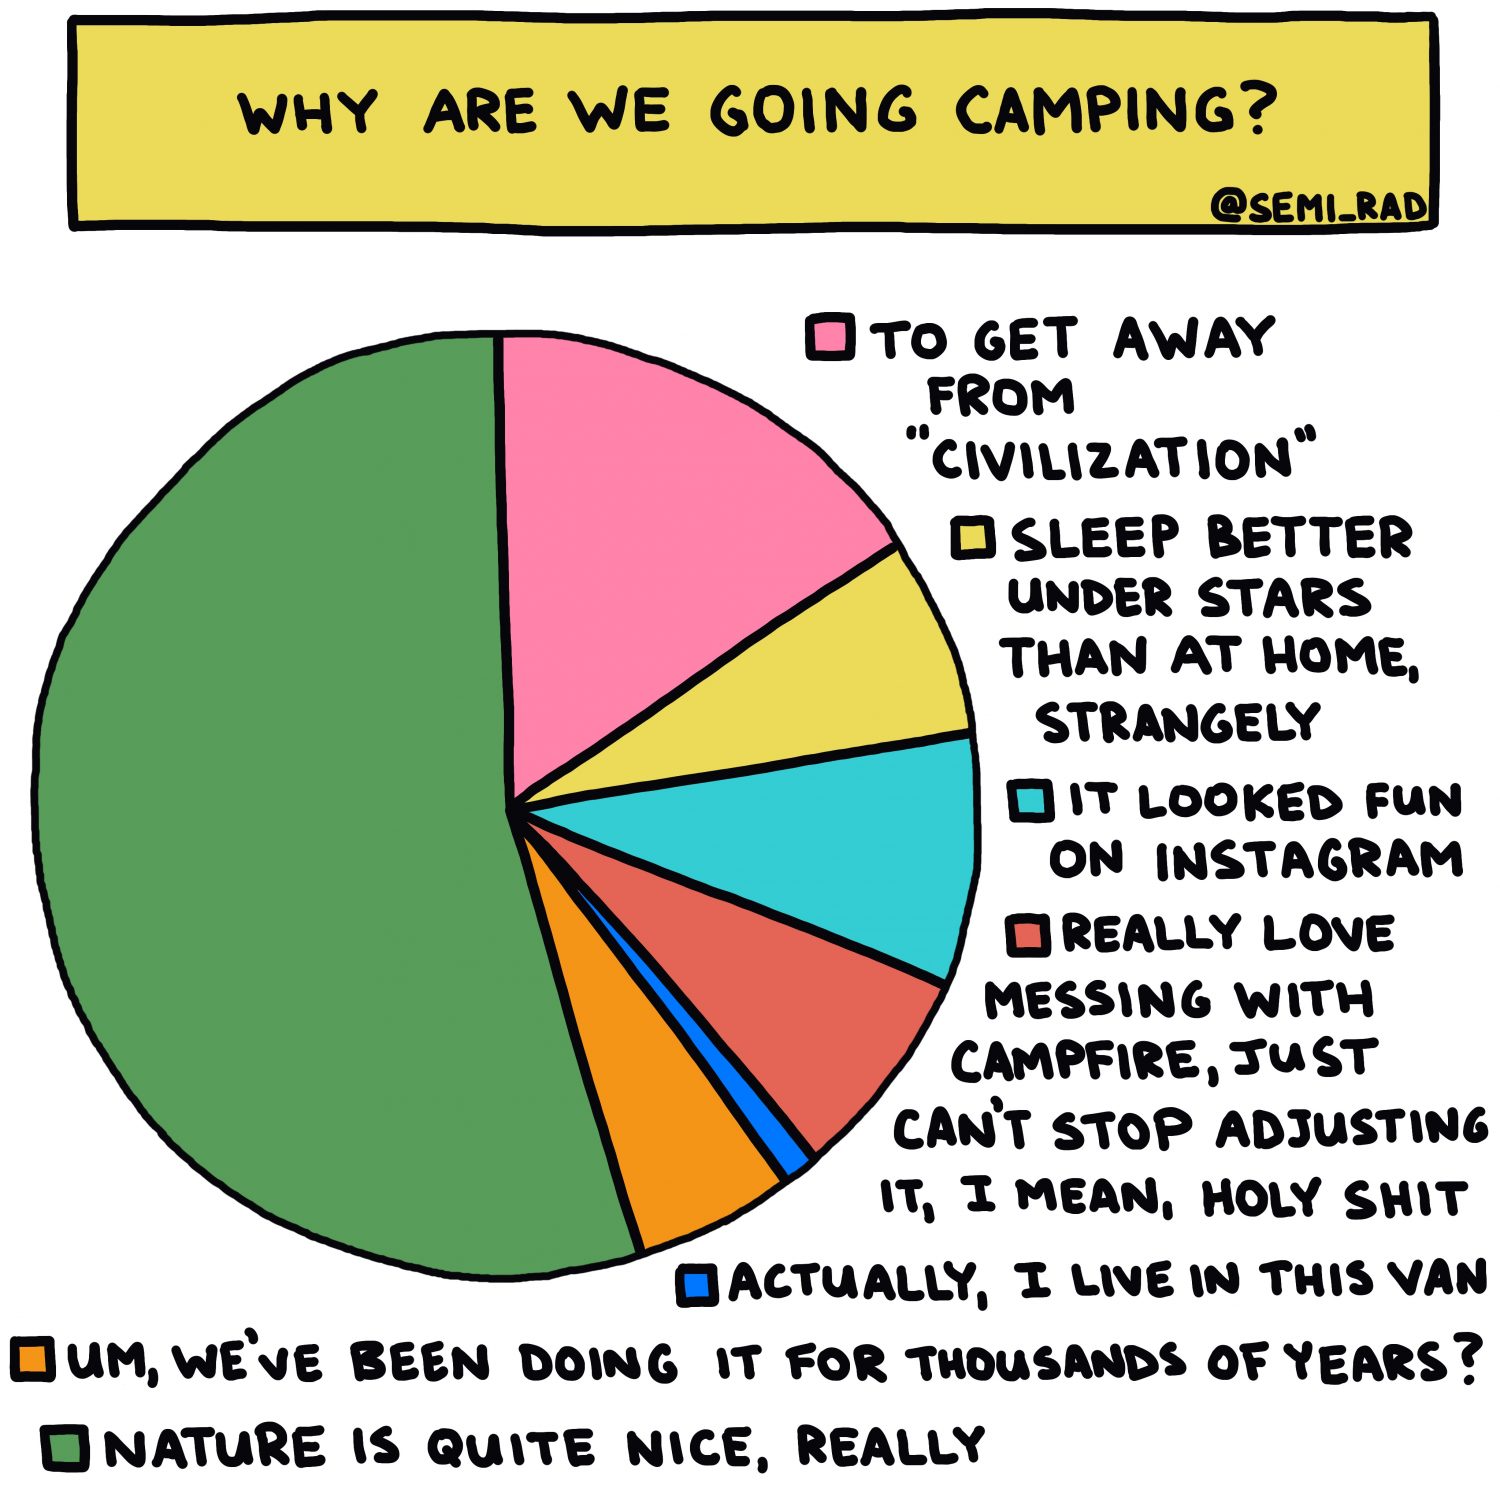 semi-rad chart: why are we going camping?